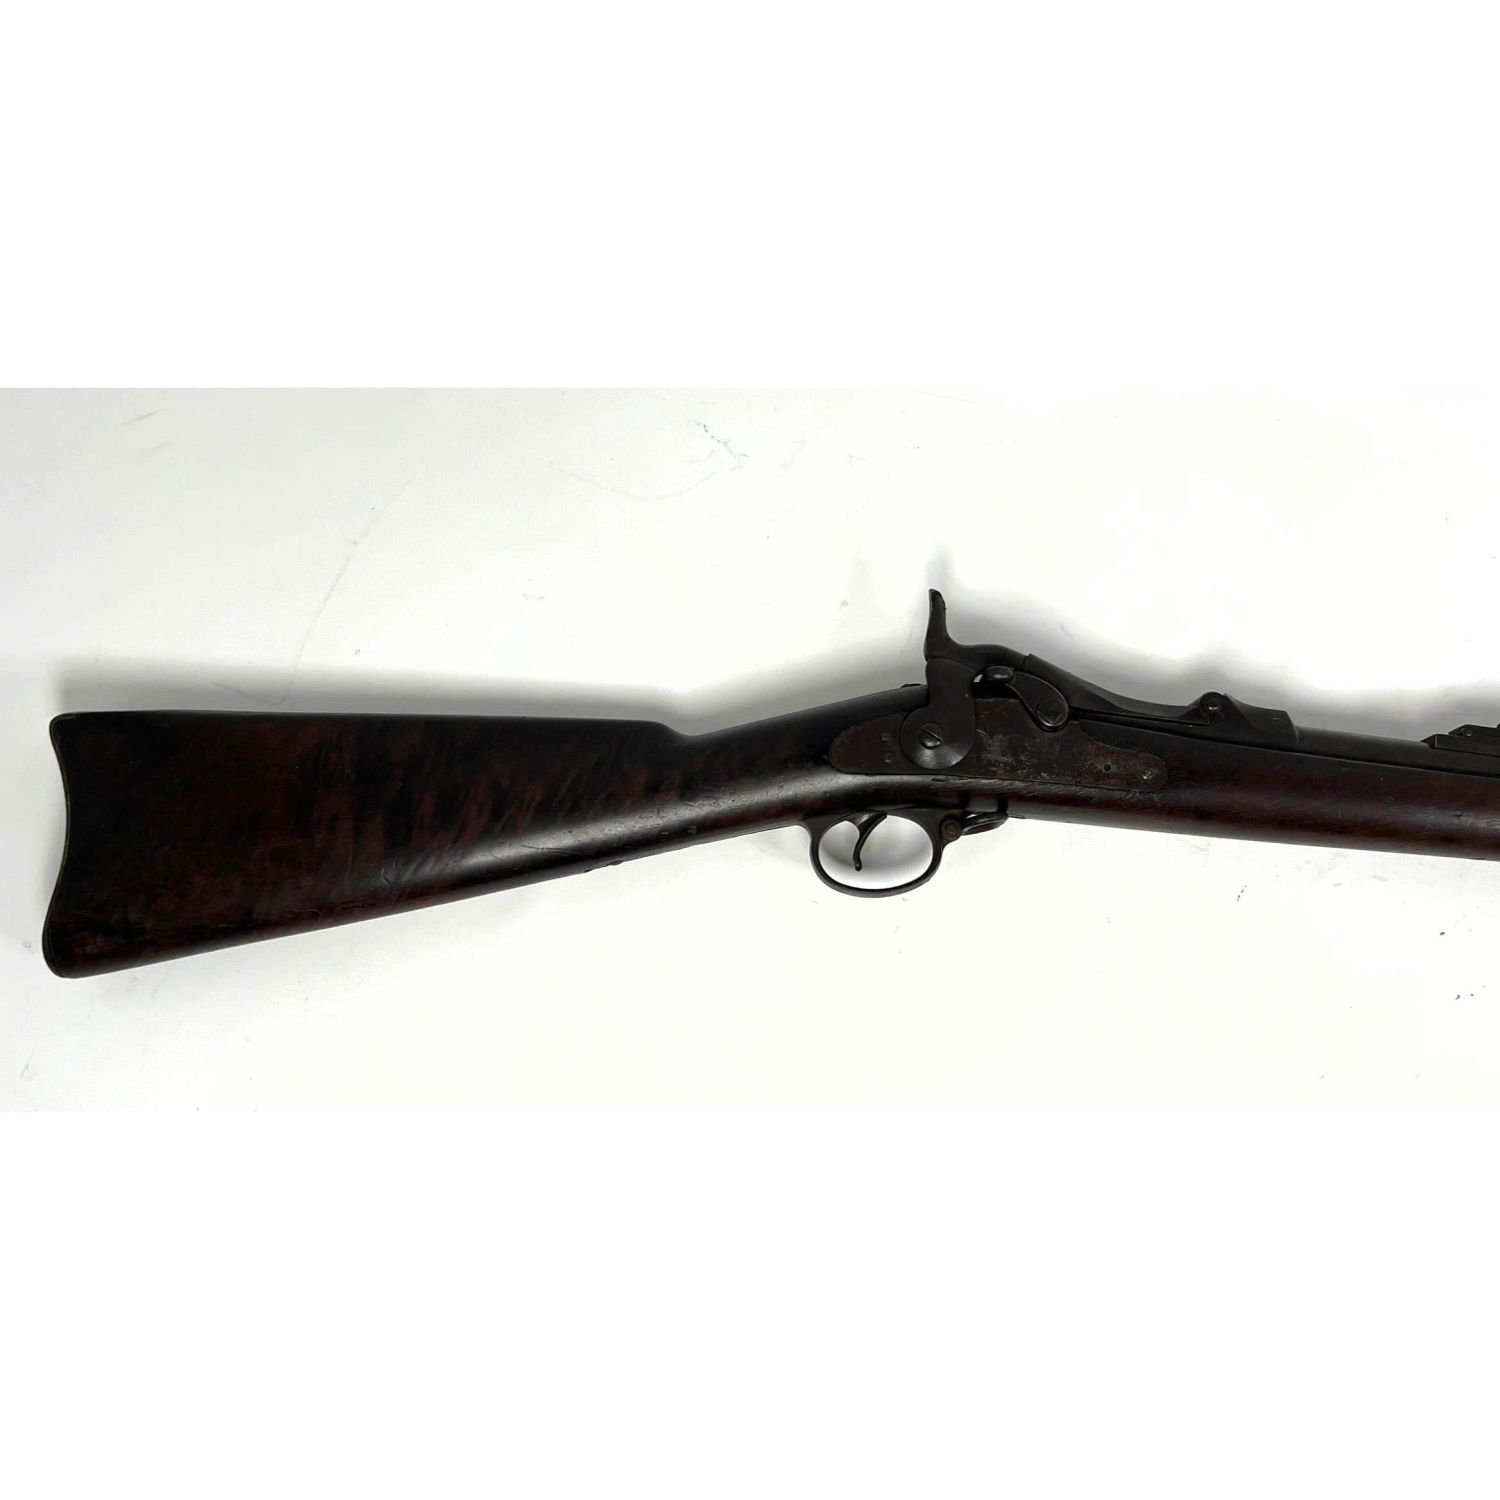 1897 Springfield Rifle. 52549. 

Dimensions: